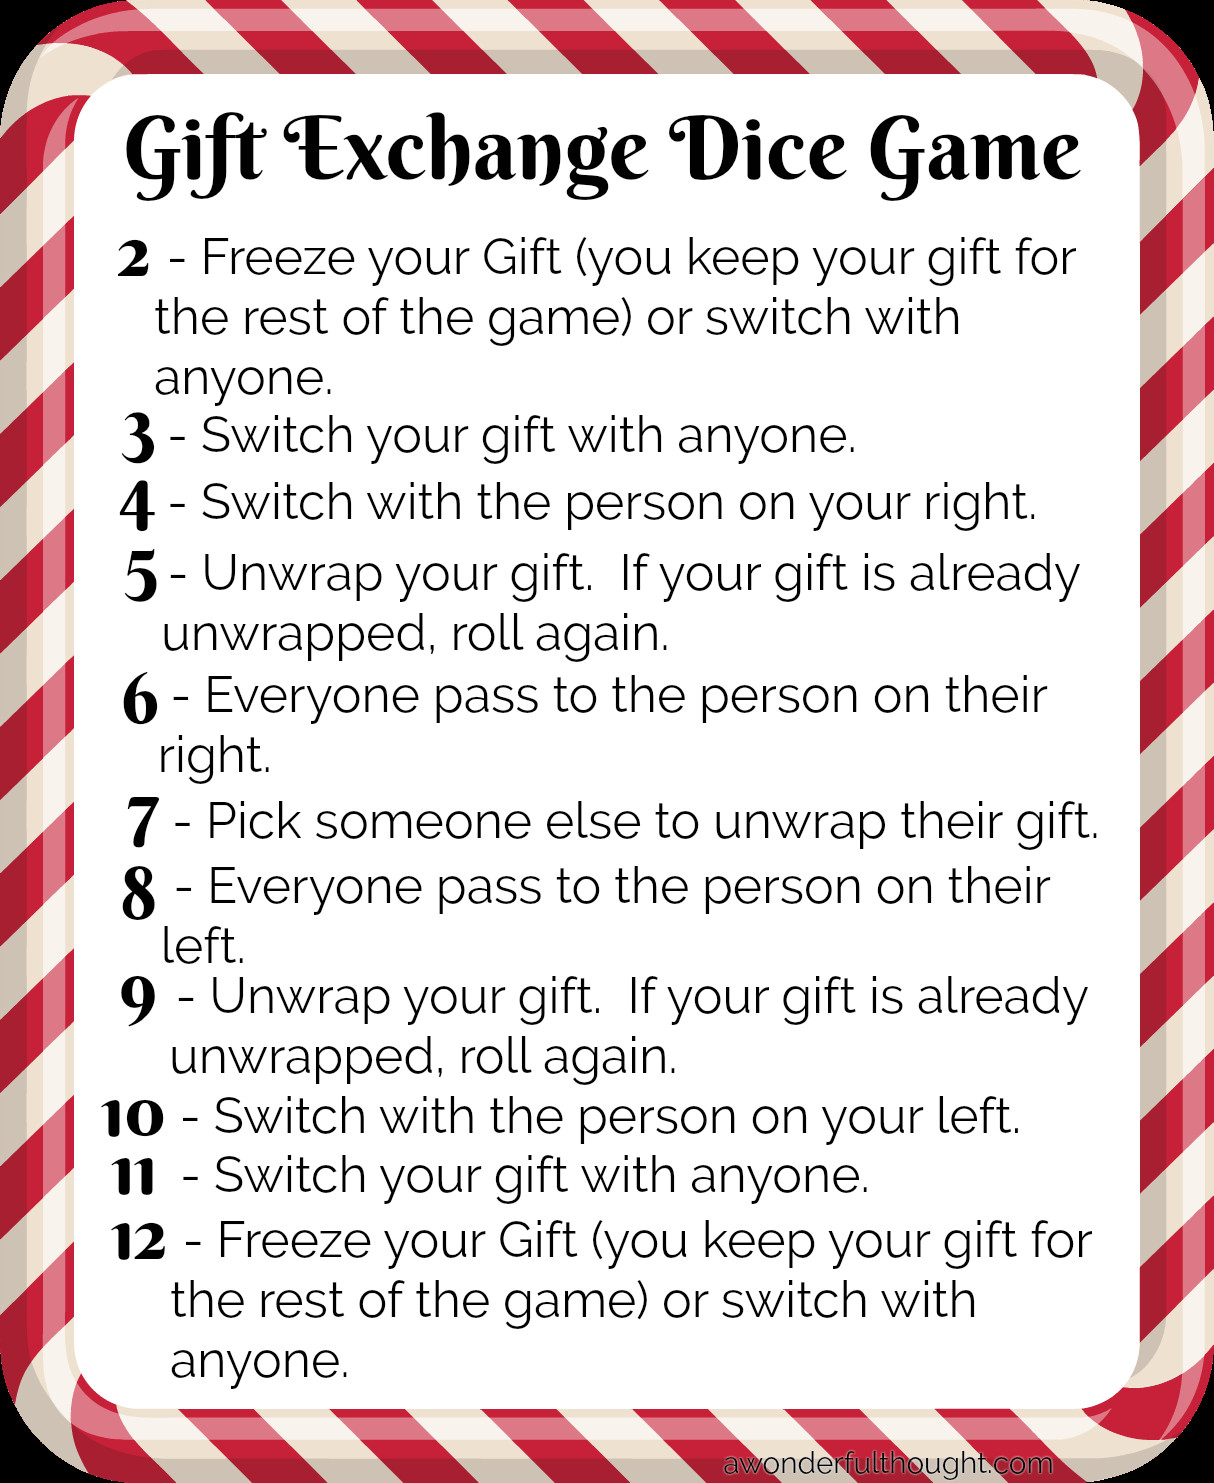 Christmas Gift Exchange Game Ideas
 Christmas Gift Exchange Ideas A Wonderful Thought